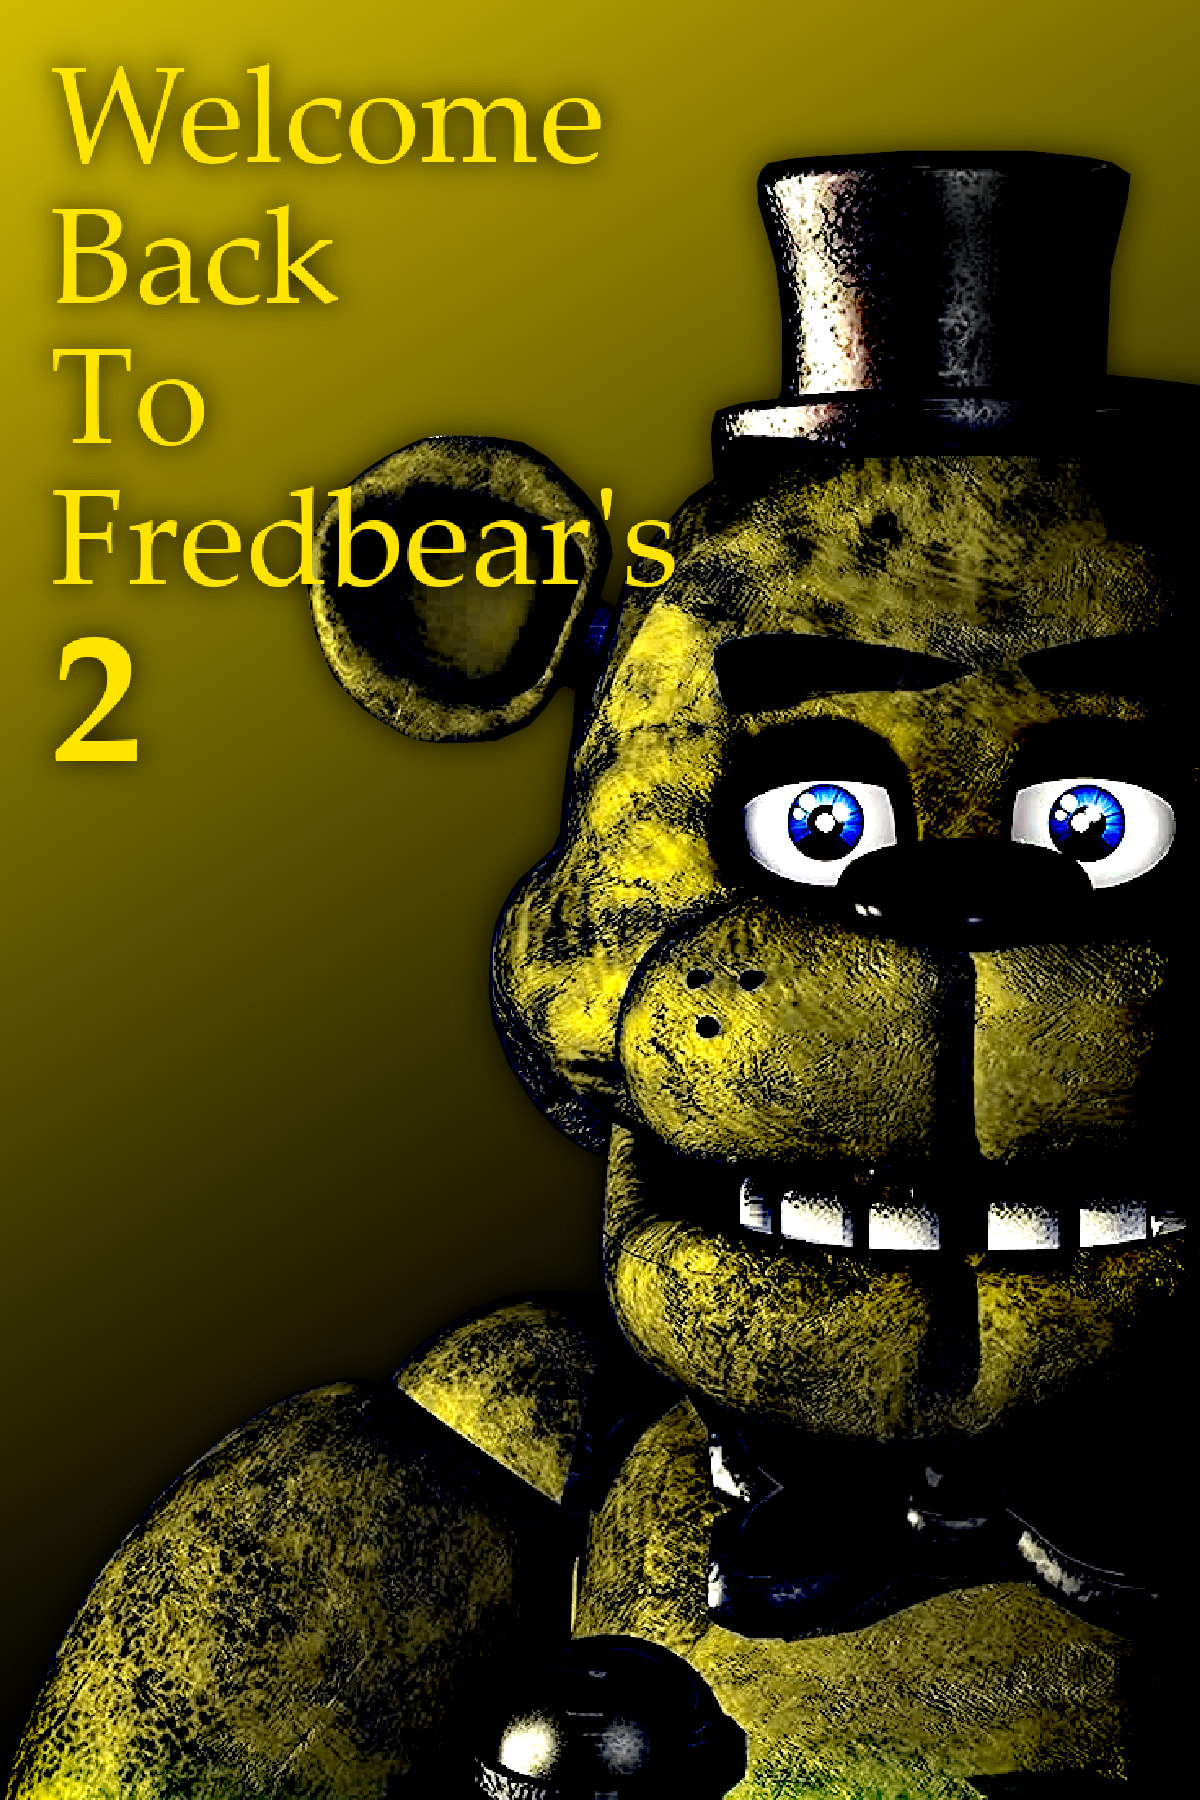 The Return To Freddy's 2 DEMO file - IndieDB